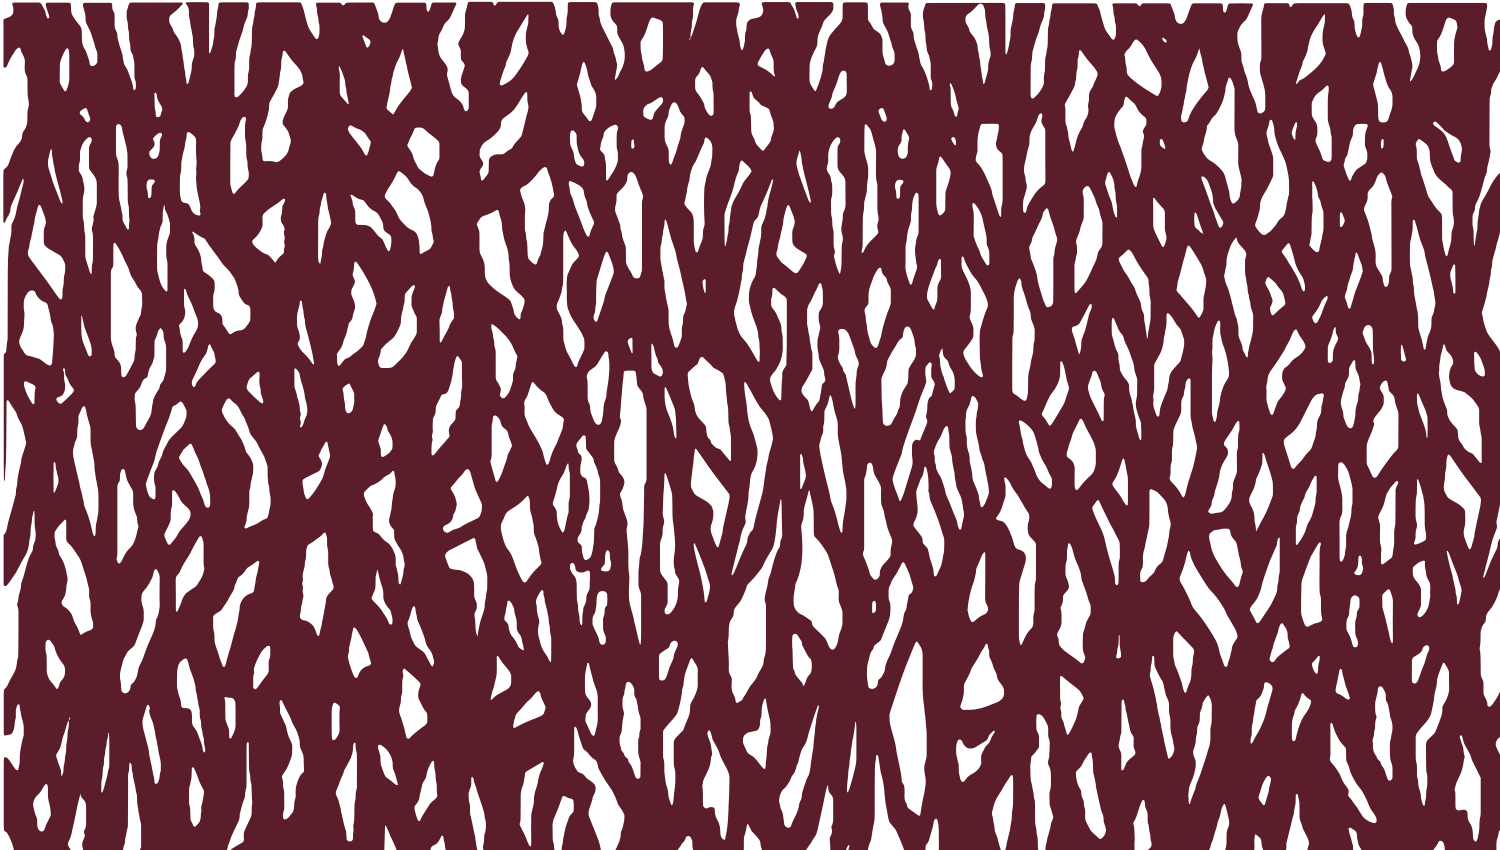 Parasoleil™ Quiet Wood© pattern displayed with a burgundy color overlay